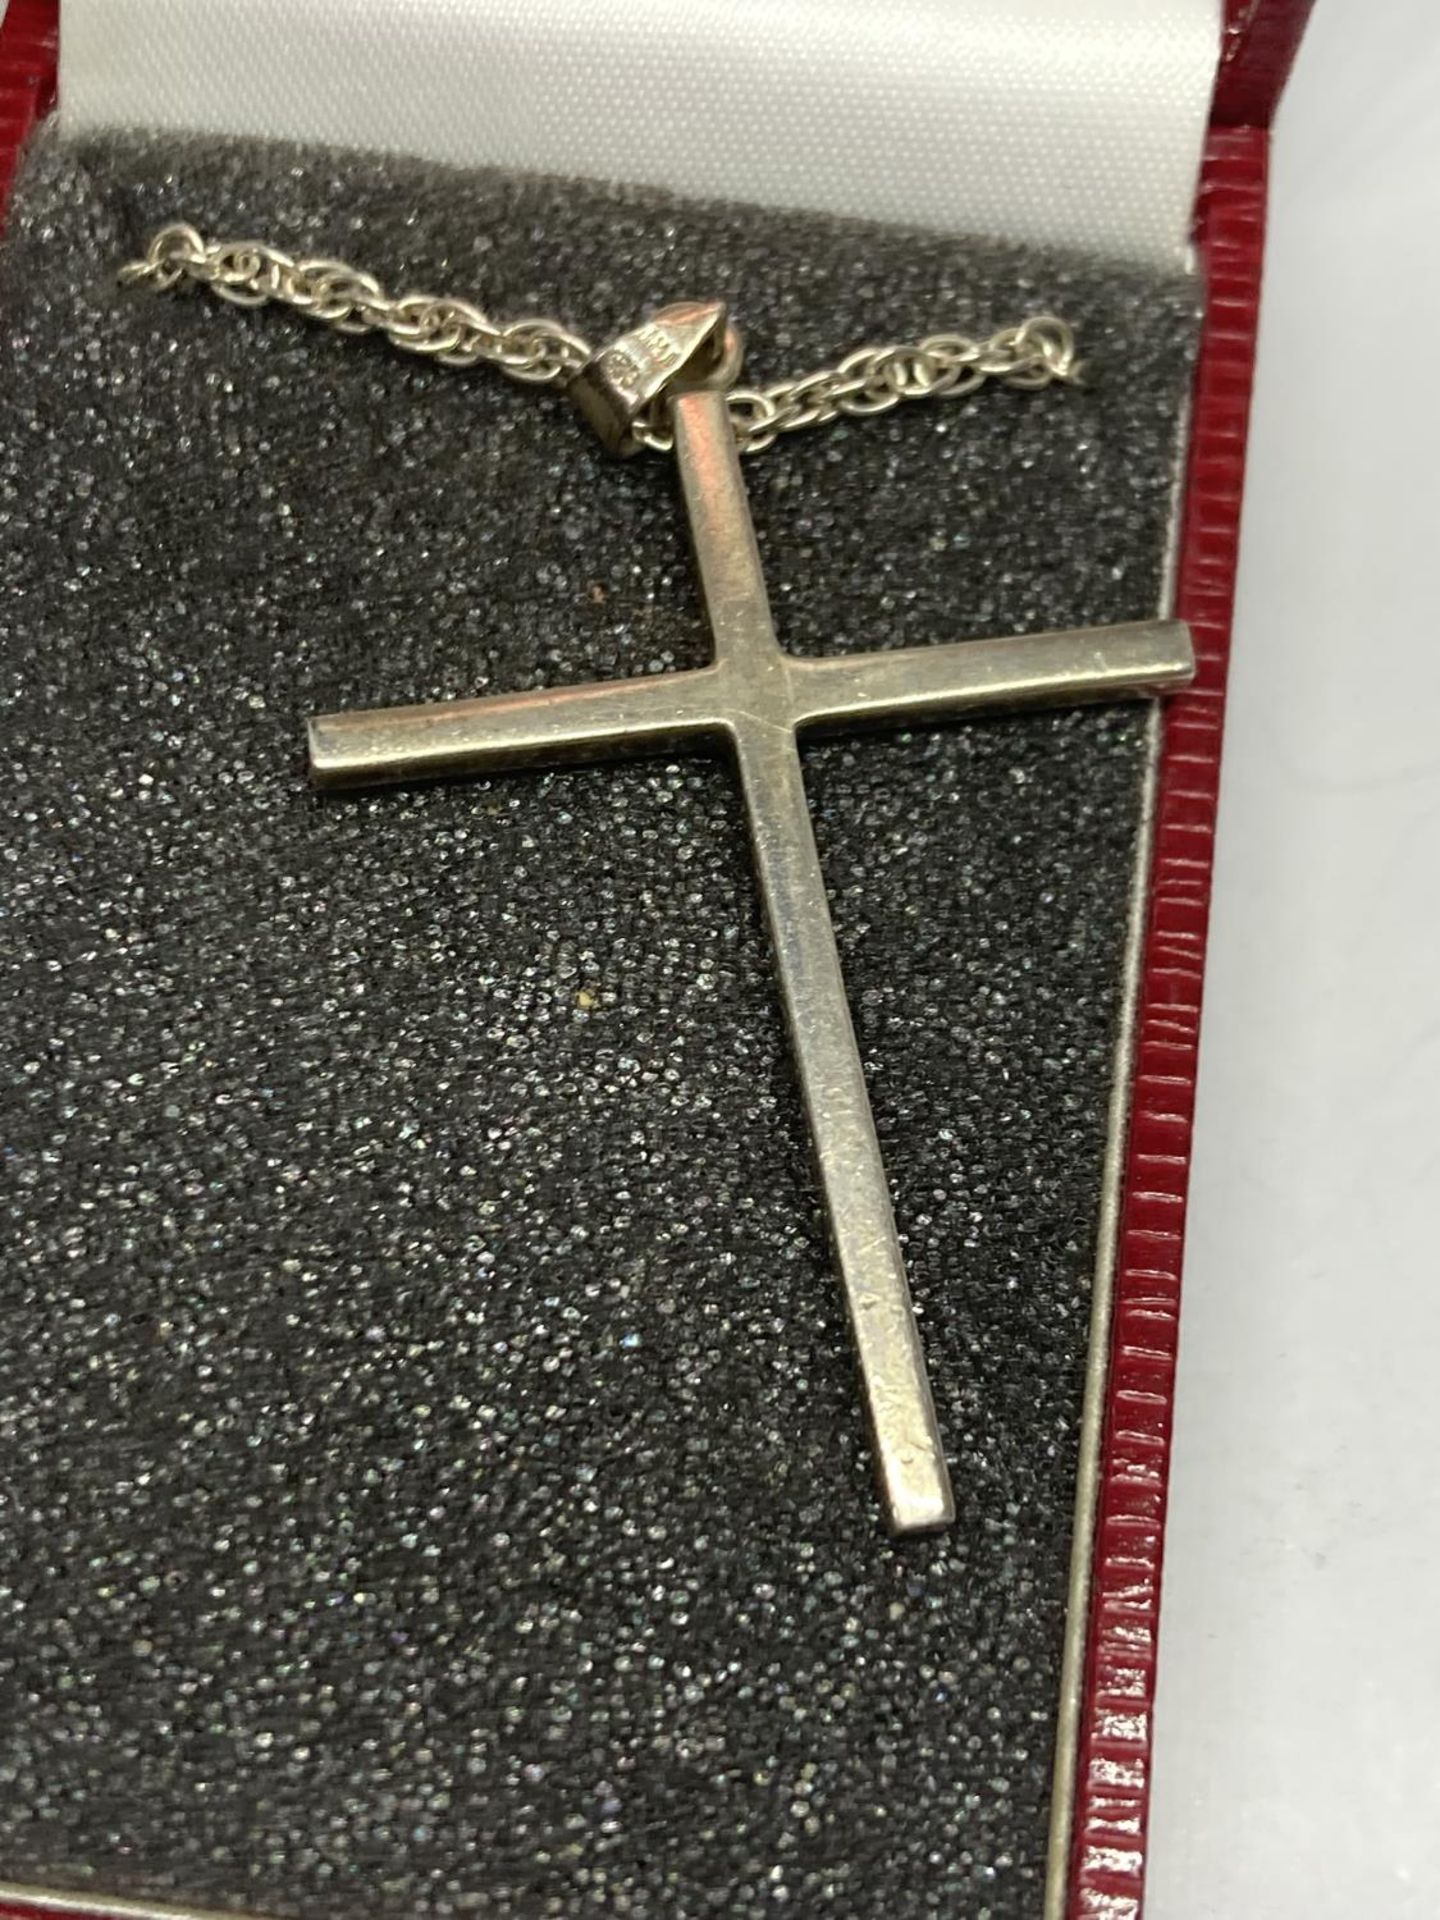 A SILVER CROSS AND CHAIN IN A PRESENTATION BOX - Image 3 of 3